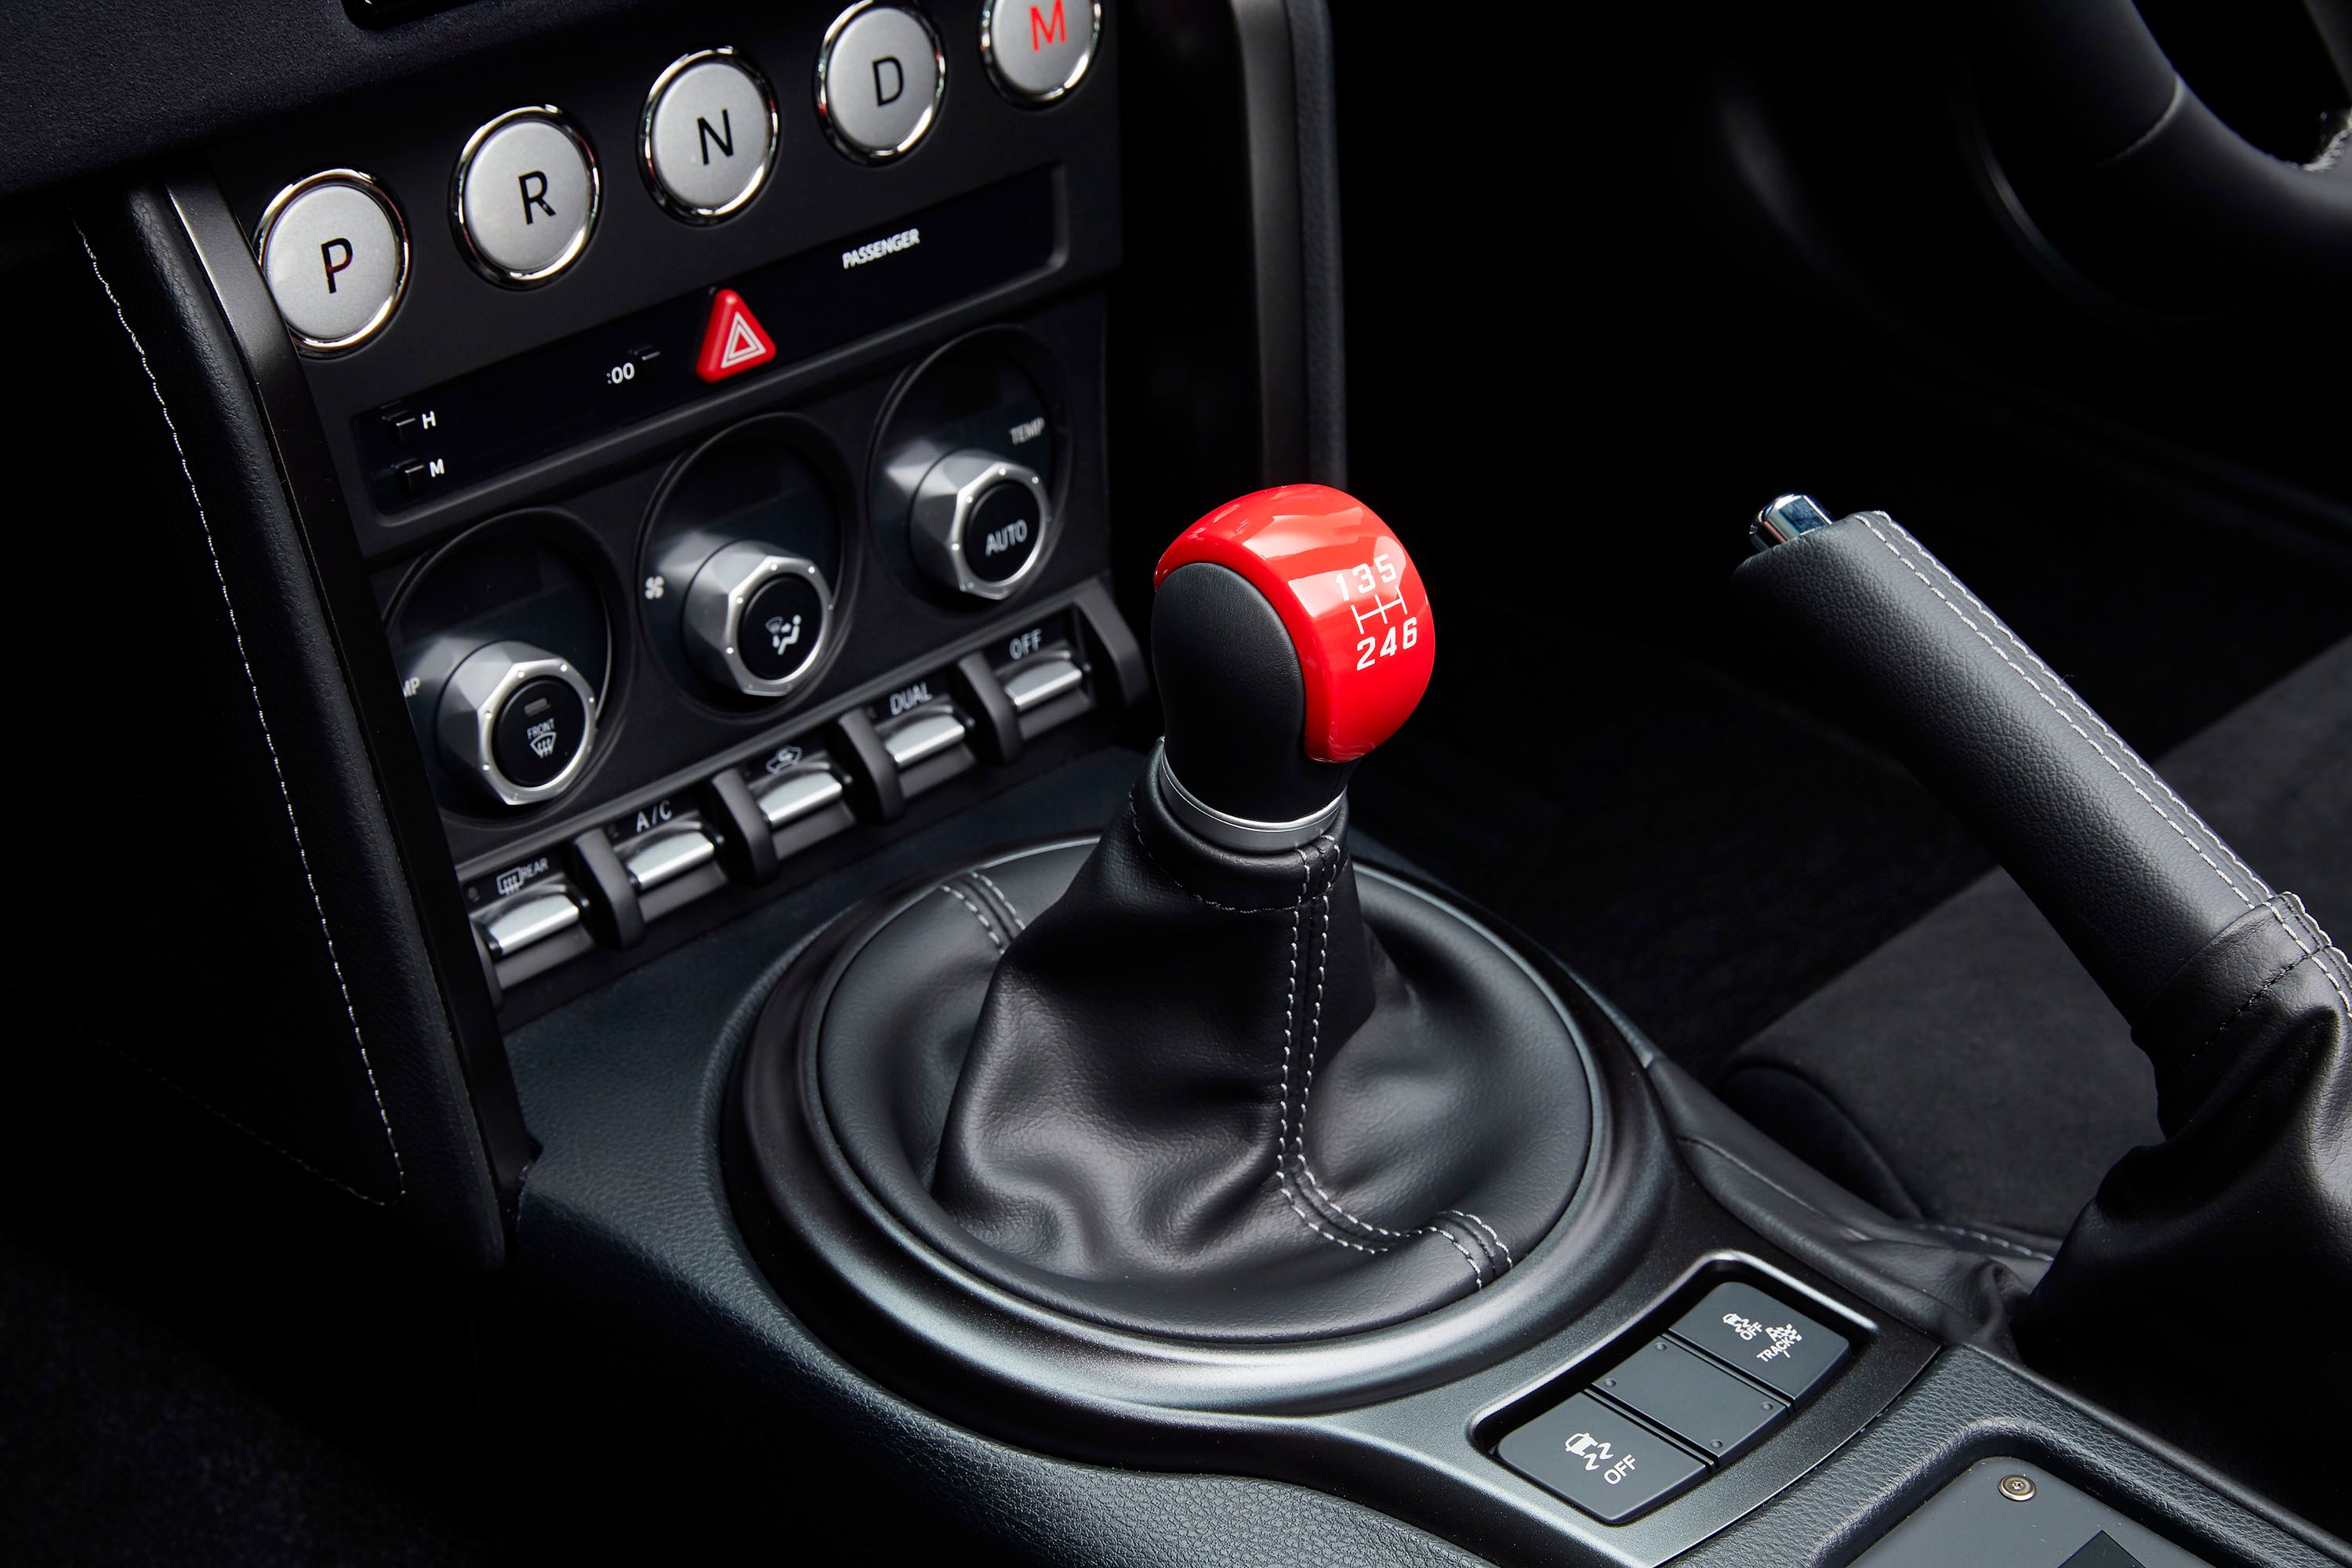 Buttons operate gearbox modes